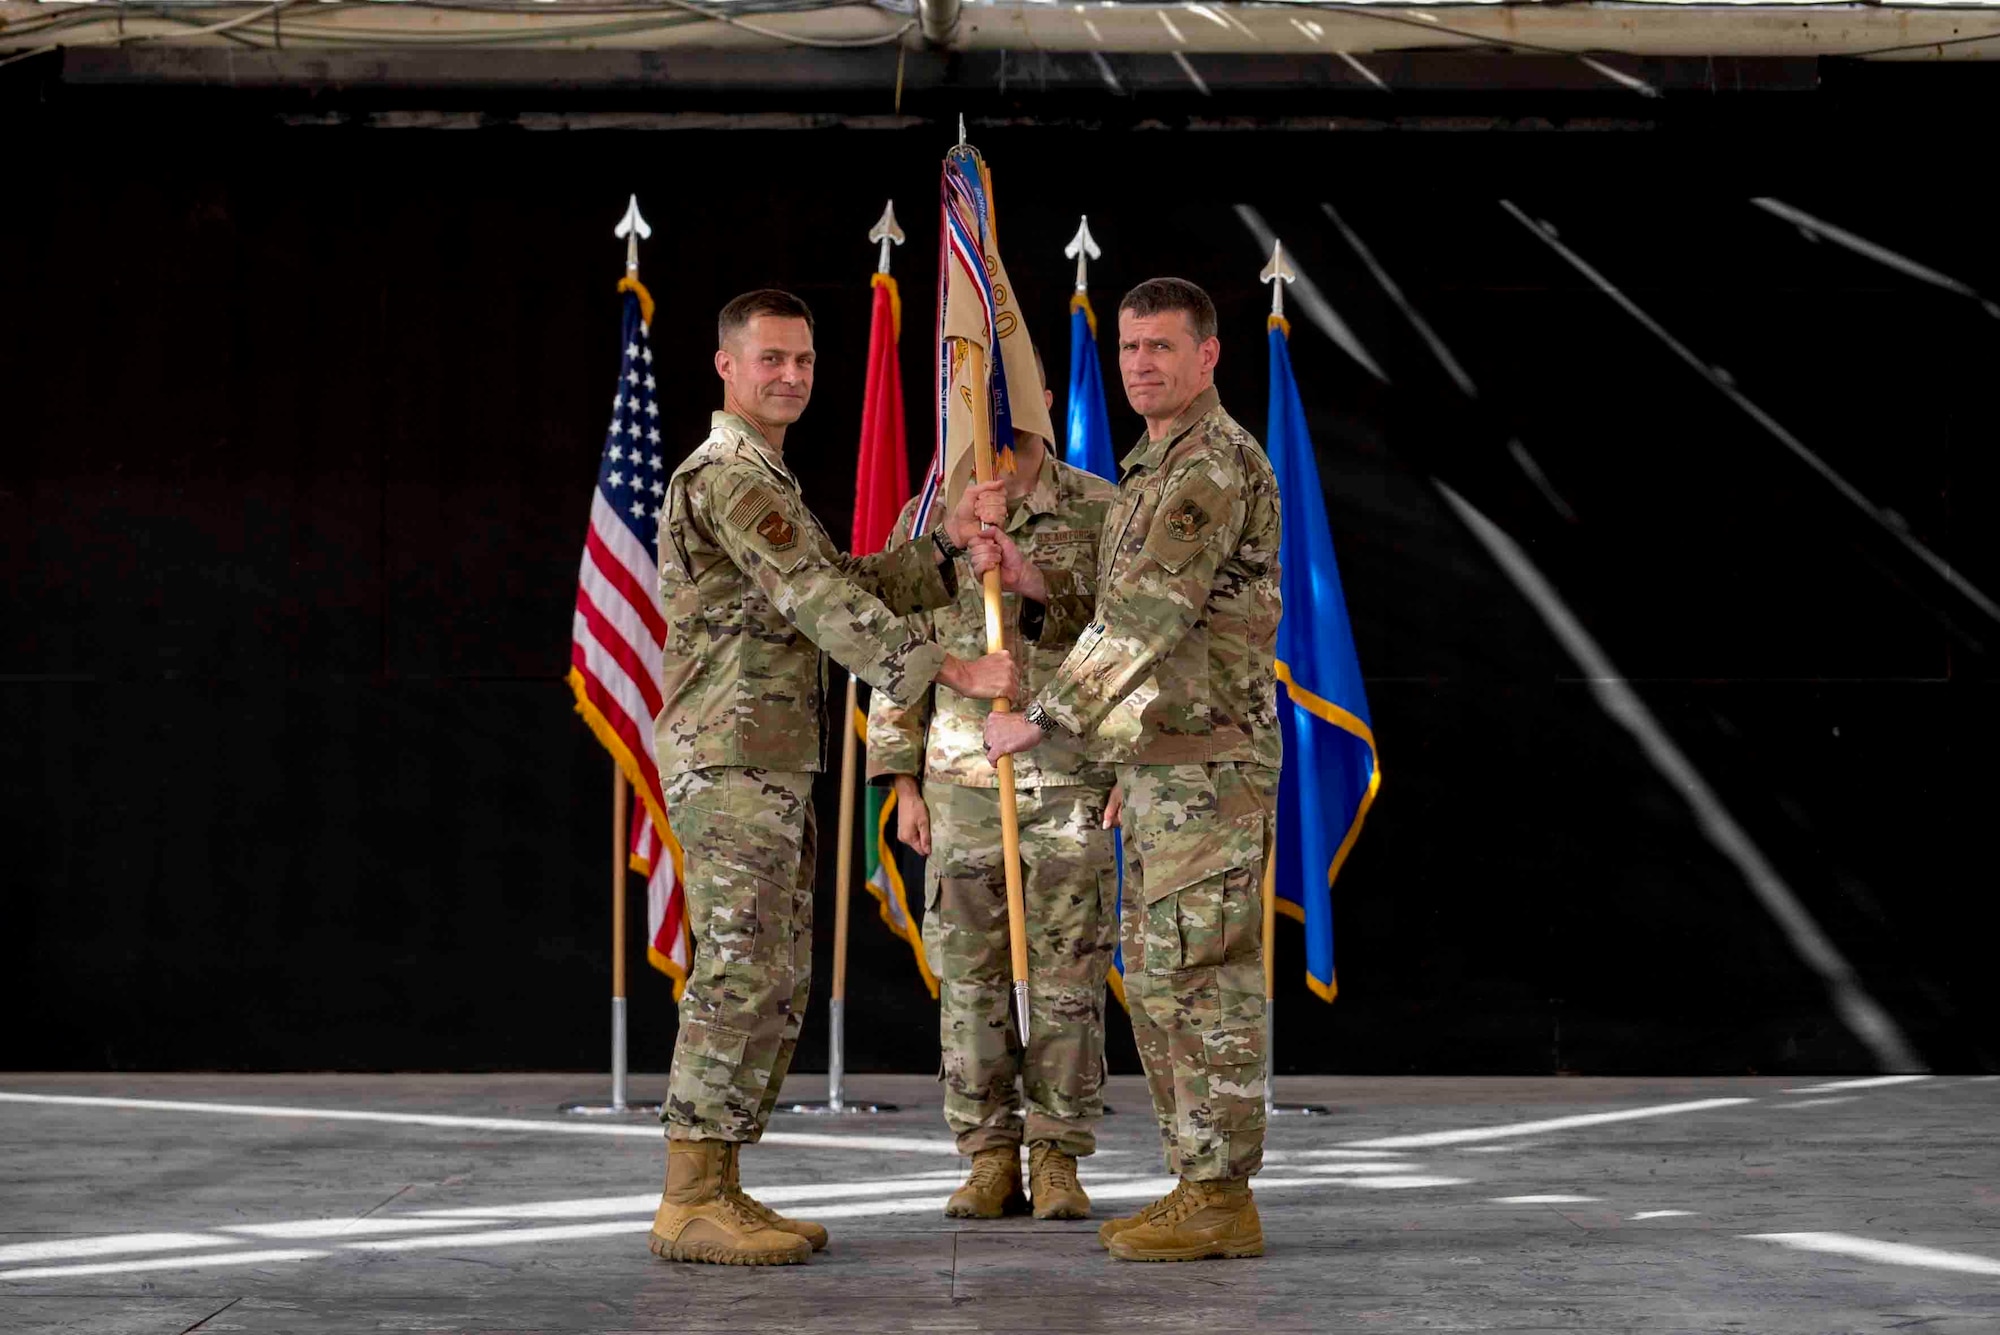 U.S. Air Force Brig. Gen. Larry Broadwell, outgoing commander, passes command of the 380th Air Expeditionary Wing to Brig. Gen. Andrew Clark, incoming commander, during a change of command ceremony at Al Dhafra Air Base, United Arab Emirates, June 8, 2021. The change of command ceremony is a military tradition that represents a formal transfer of authority and responsibility for a unit from one commanding officer to another.